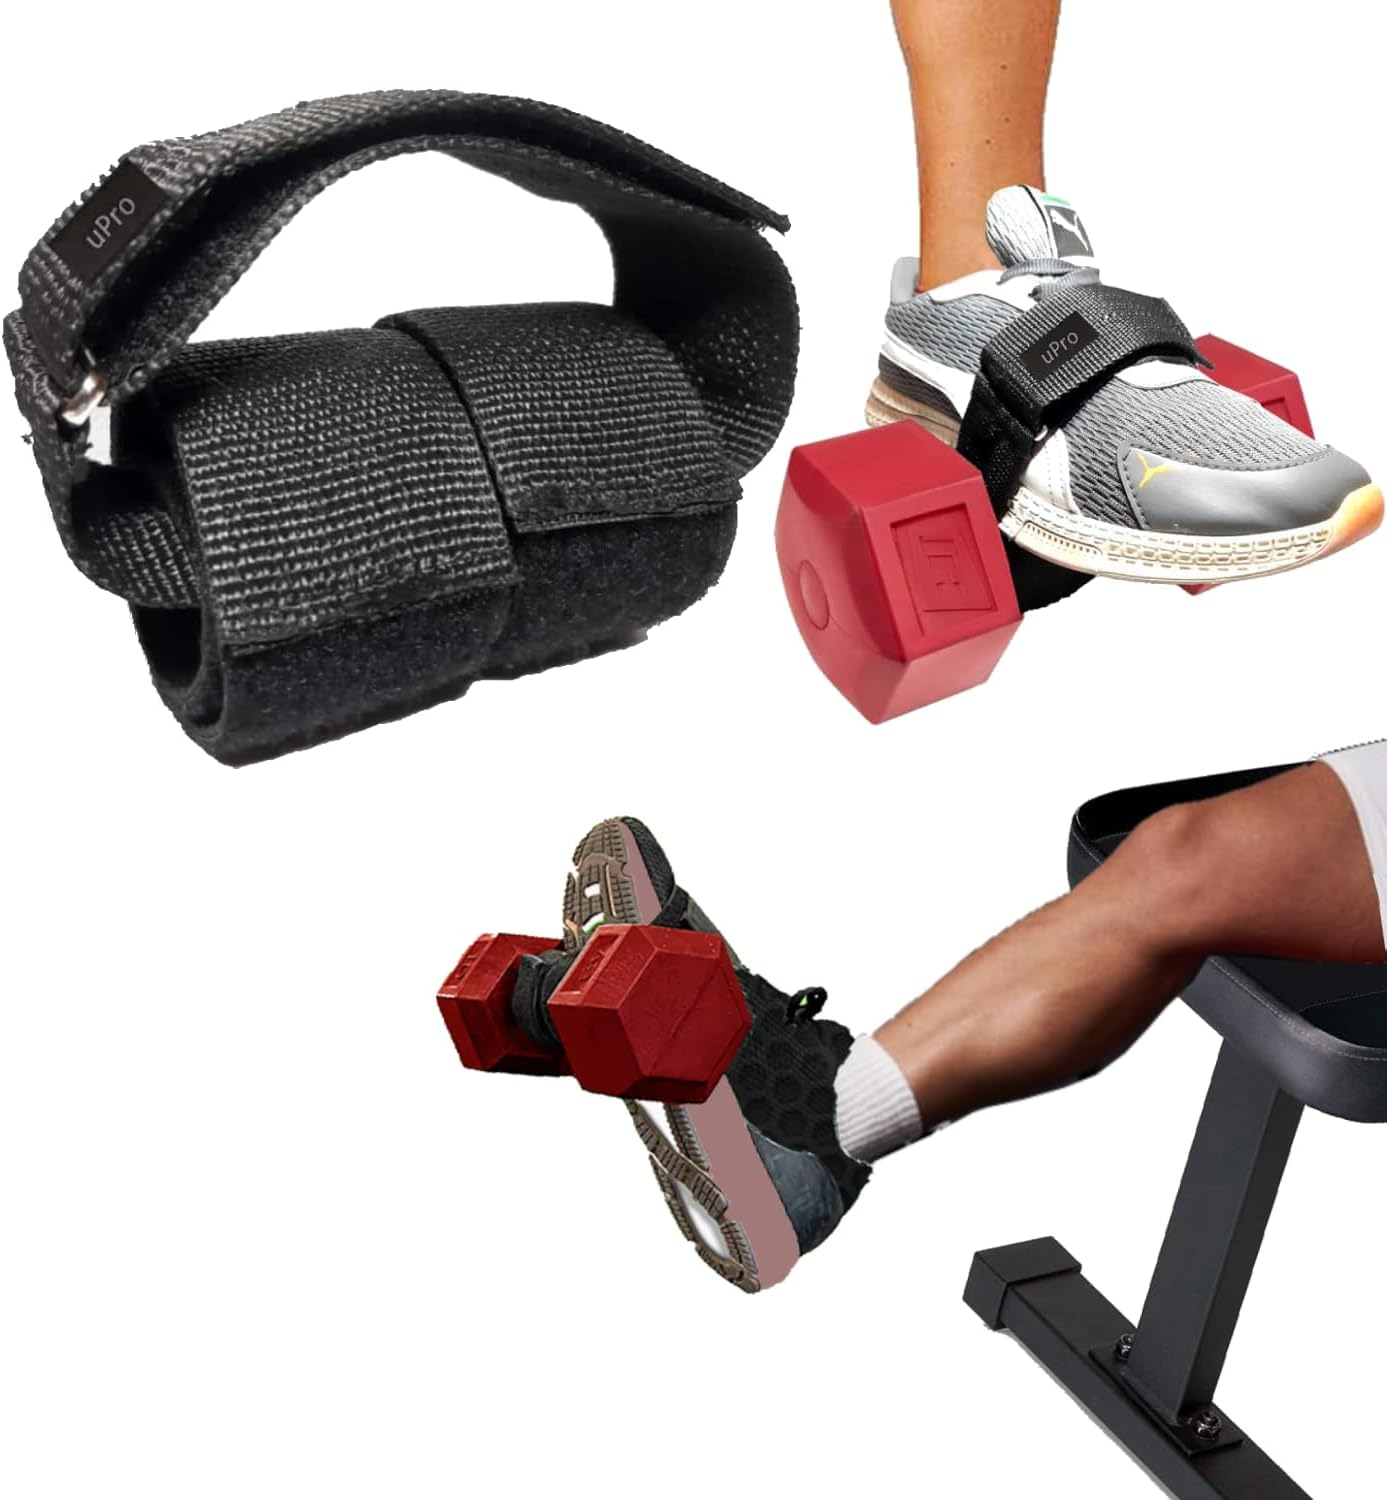 Weight Lifting Tibialis Trainer Foot Strap for Calf and Shin Workouts - Knees Over Toes Tibia Dorsi Calf Machine - Weight Lifting Tibialis Bar - ATG Shin Splint Relief Exercise (StrapCarrying Bag)